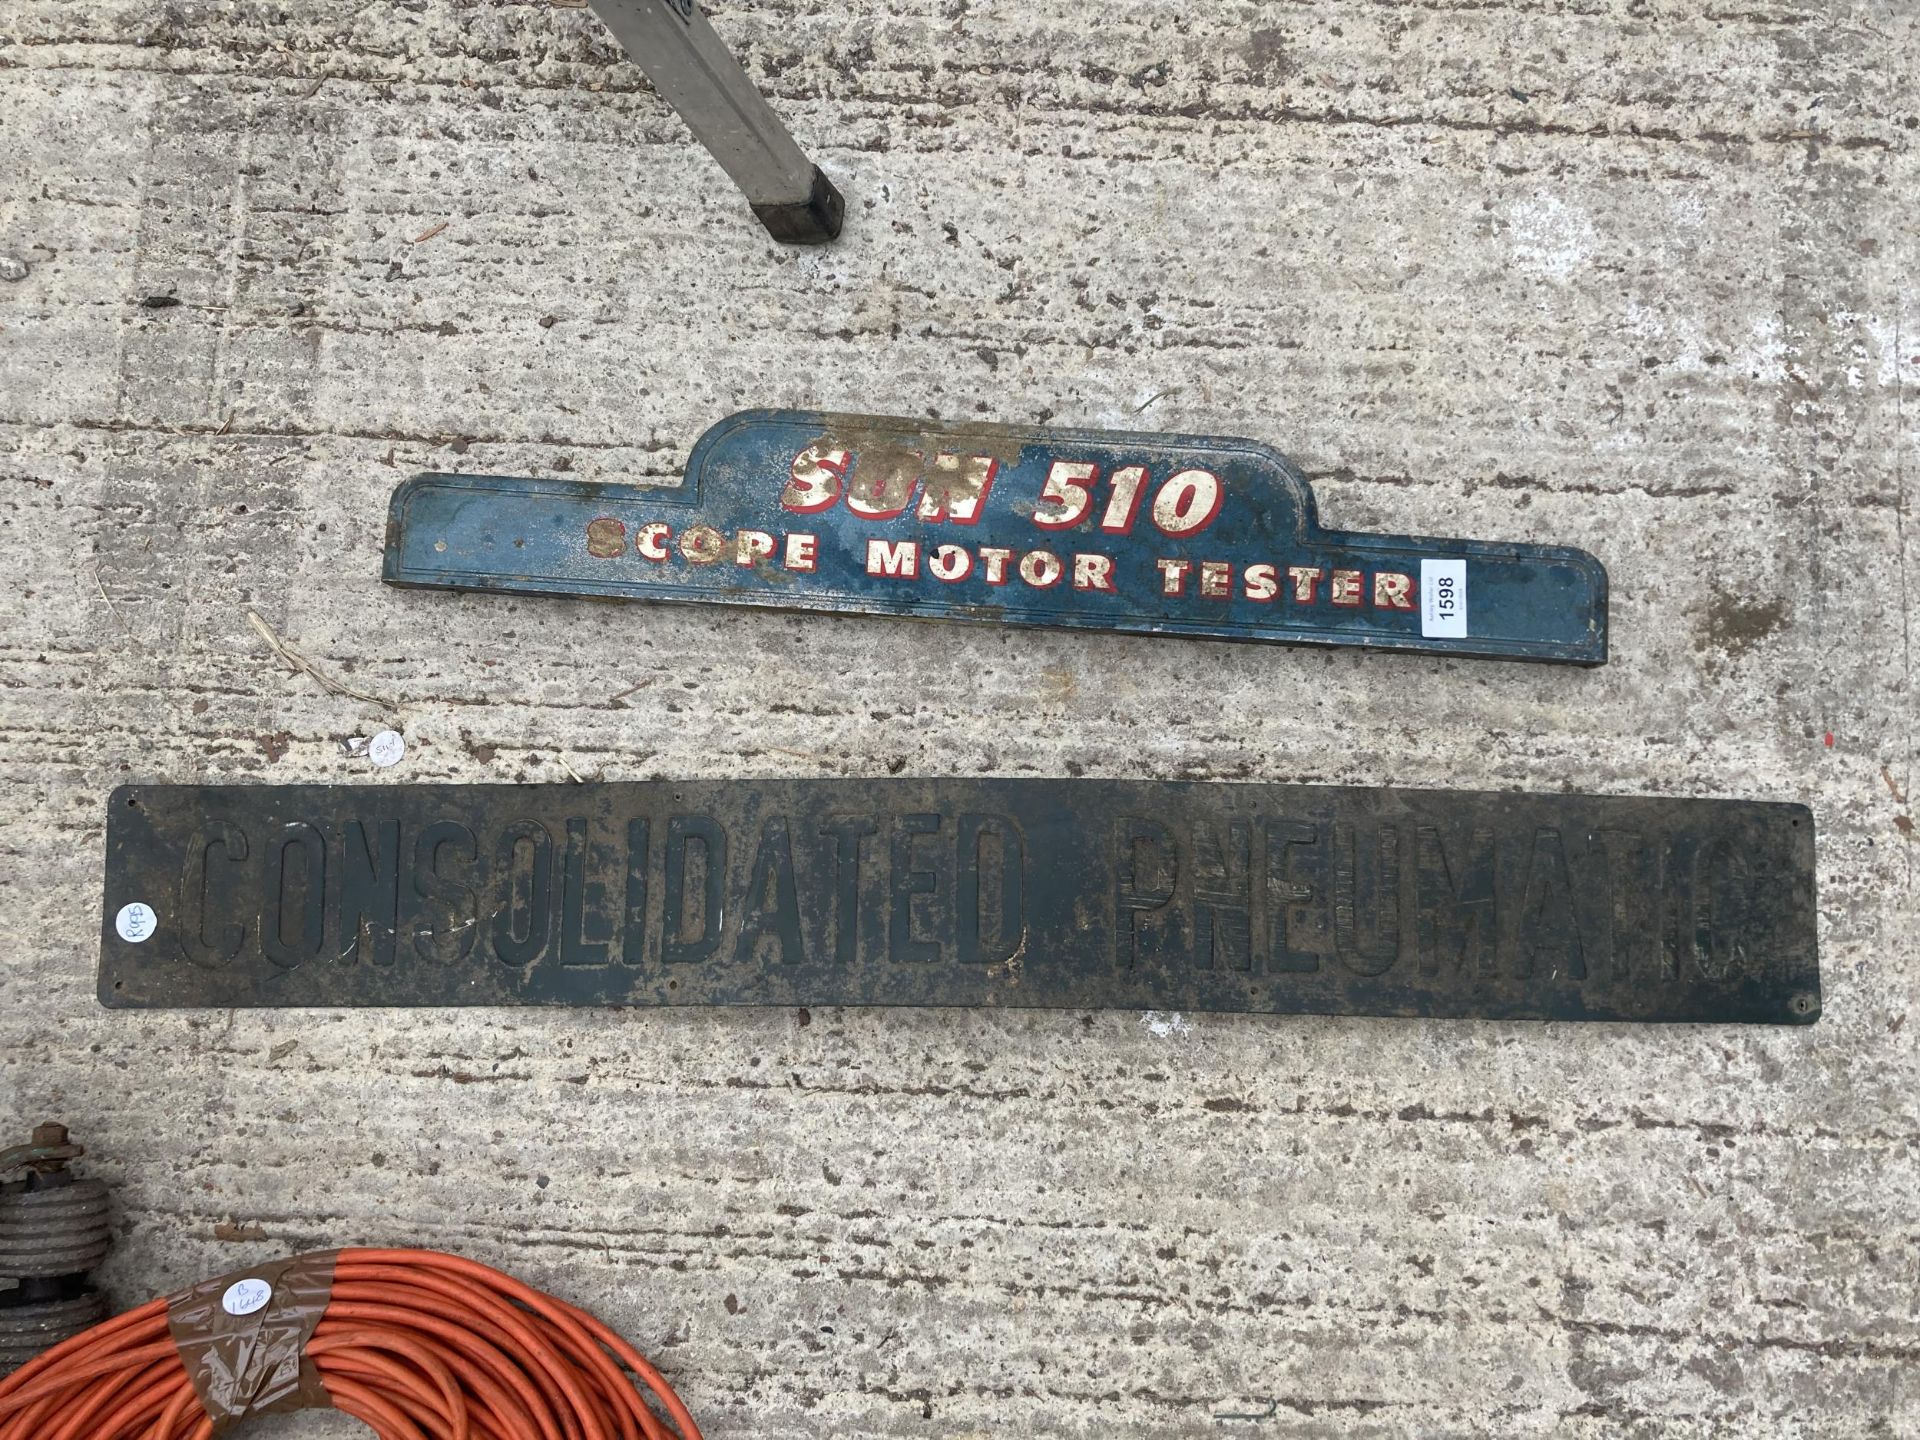 A VINTAGE CAST ALLOY 'SCOPE MOTOR TESTER' SIGN AND A FURTHER TIN 'CONSOLIDATED PNEUMATIC' SIGN